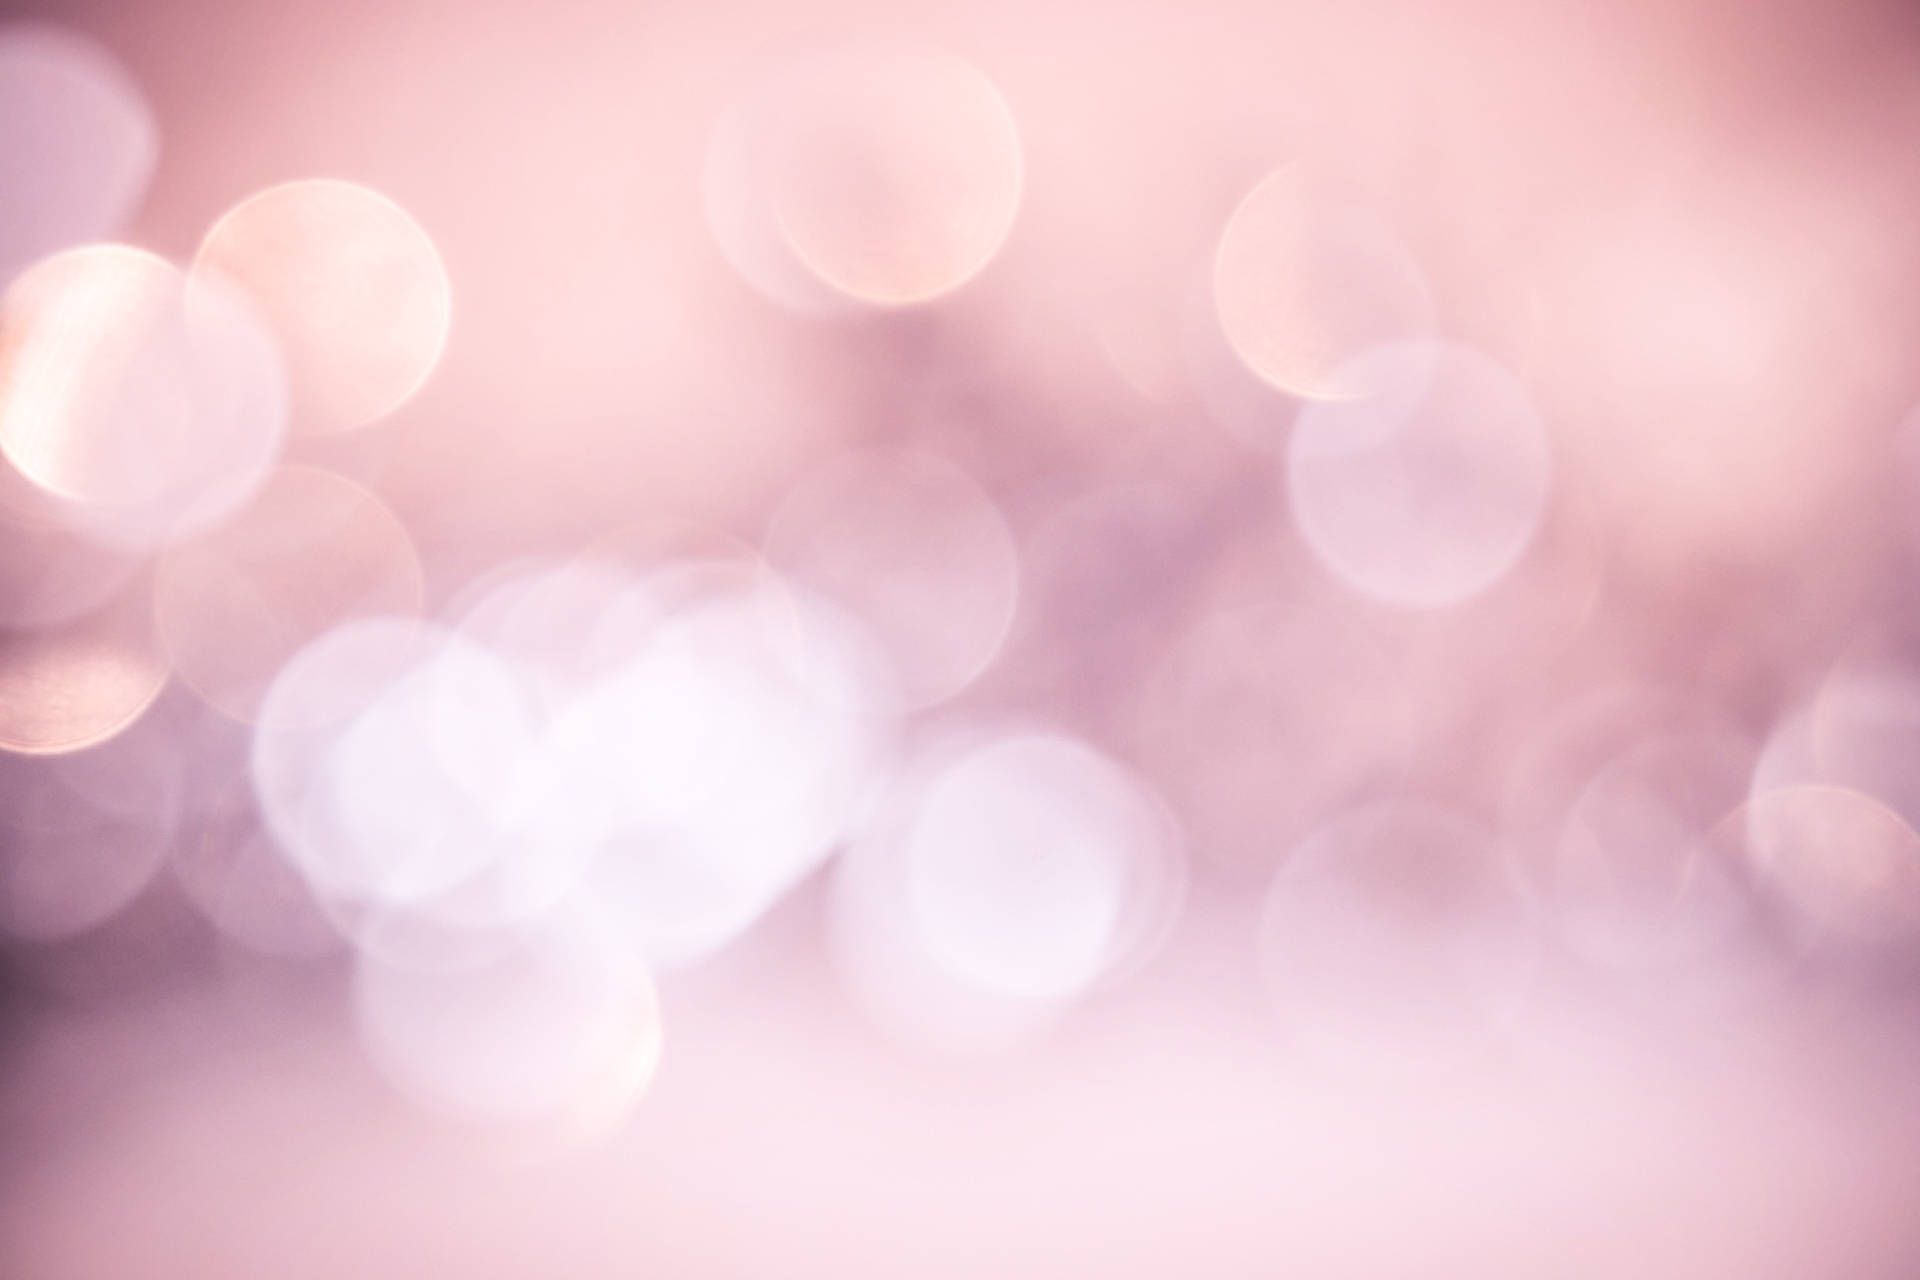 Bokeh of pink and white lights on a pink background - Blurry